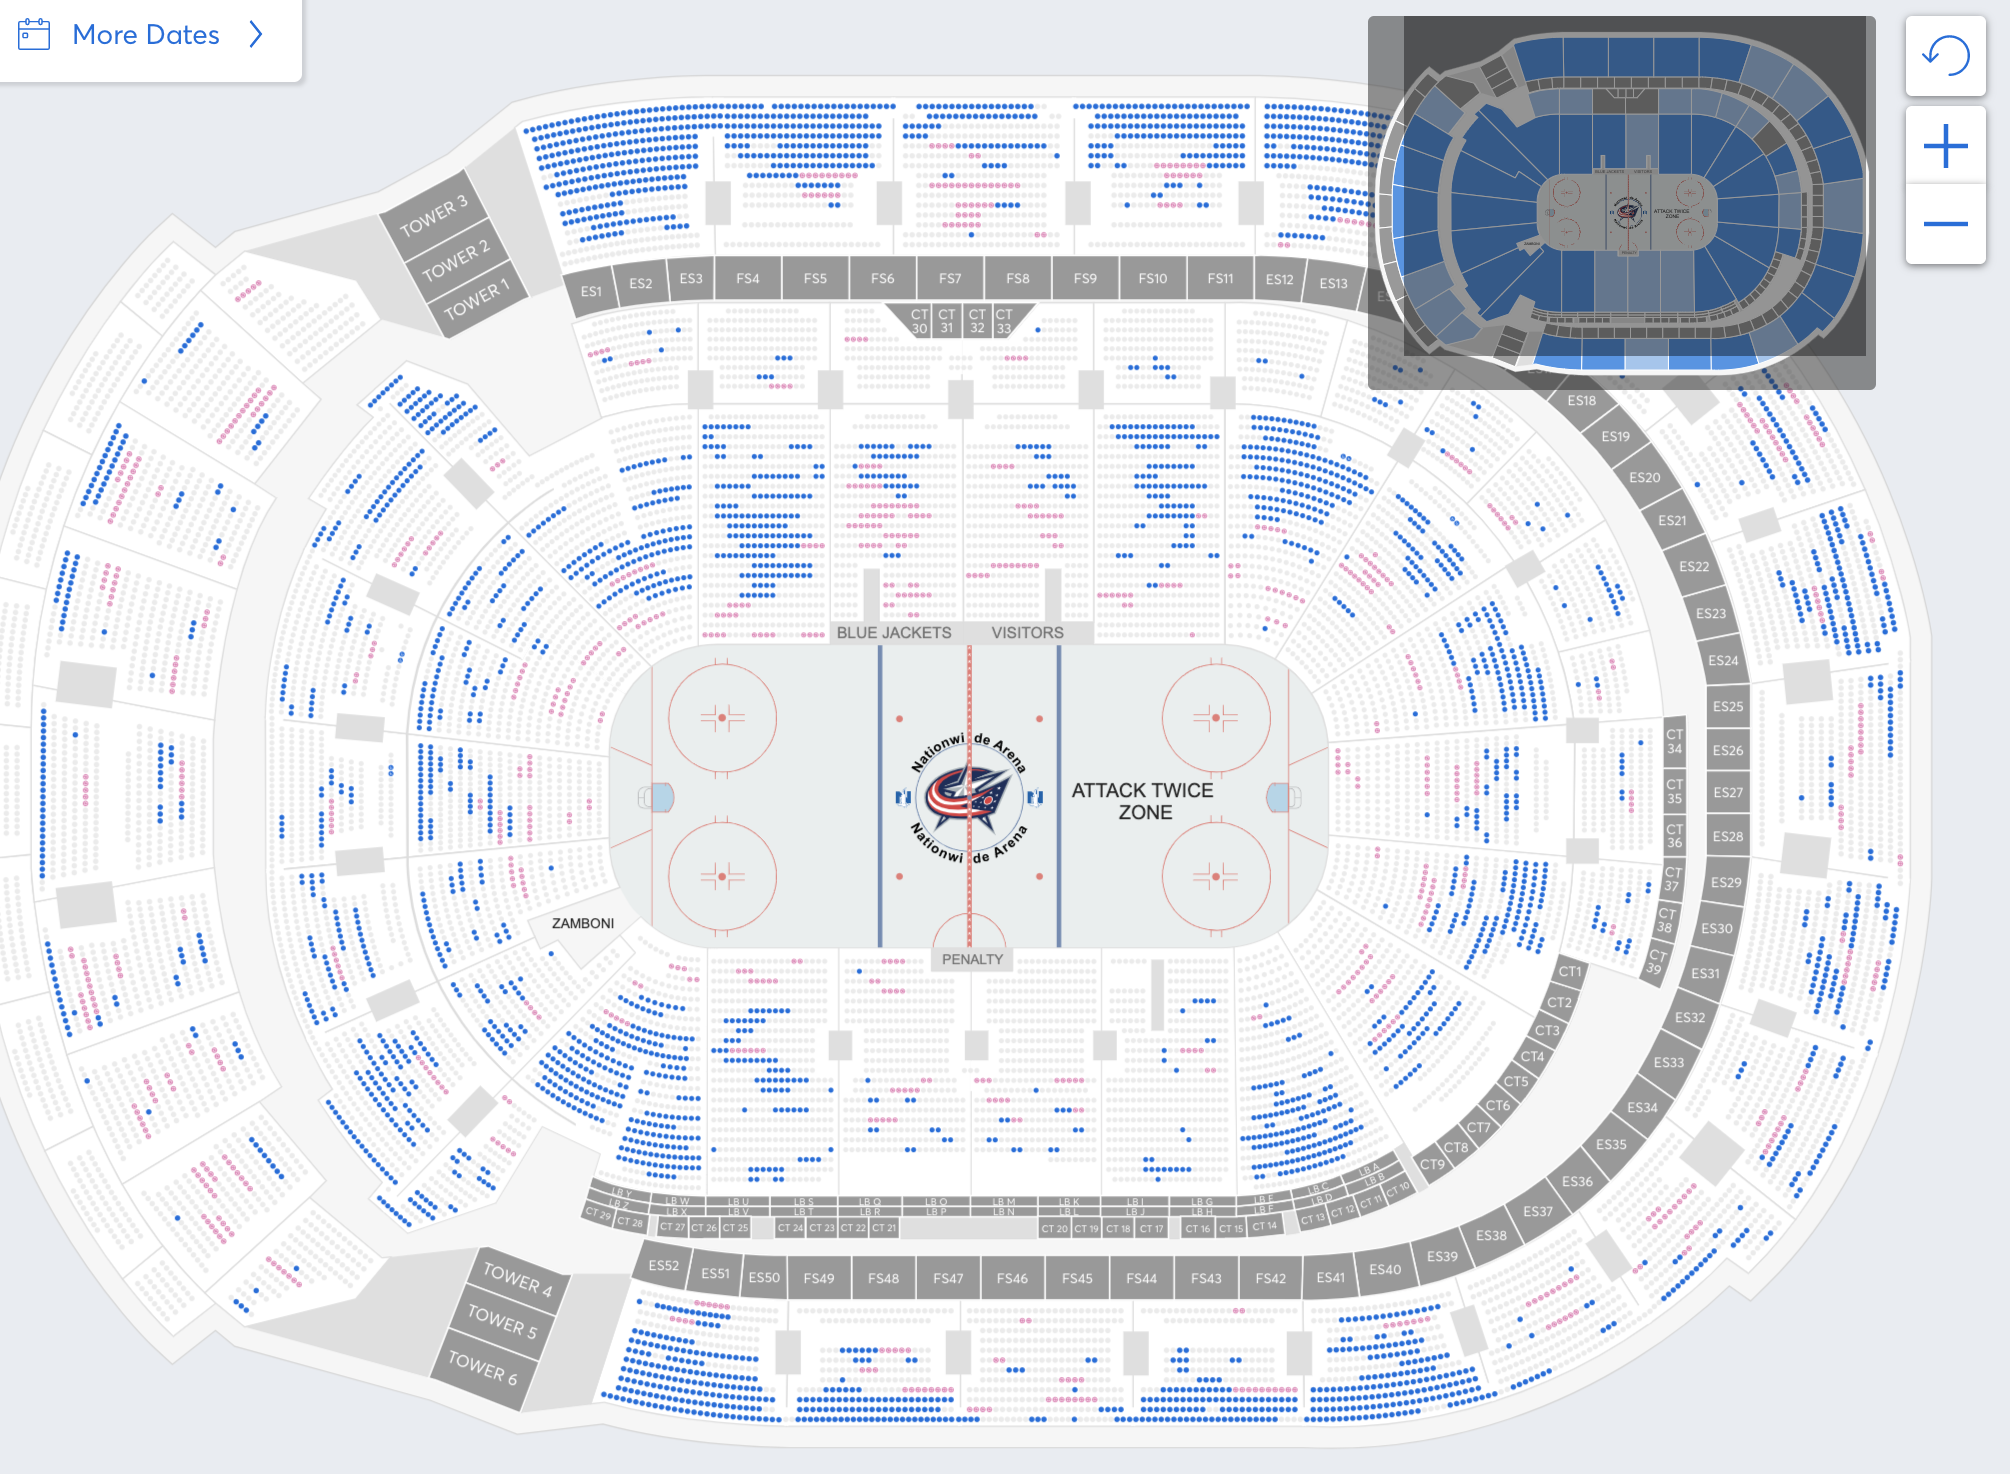 Columbus Blue Jackets Seating Chart With Rows Review Home Decor